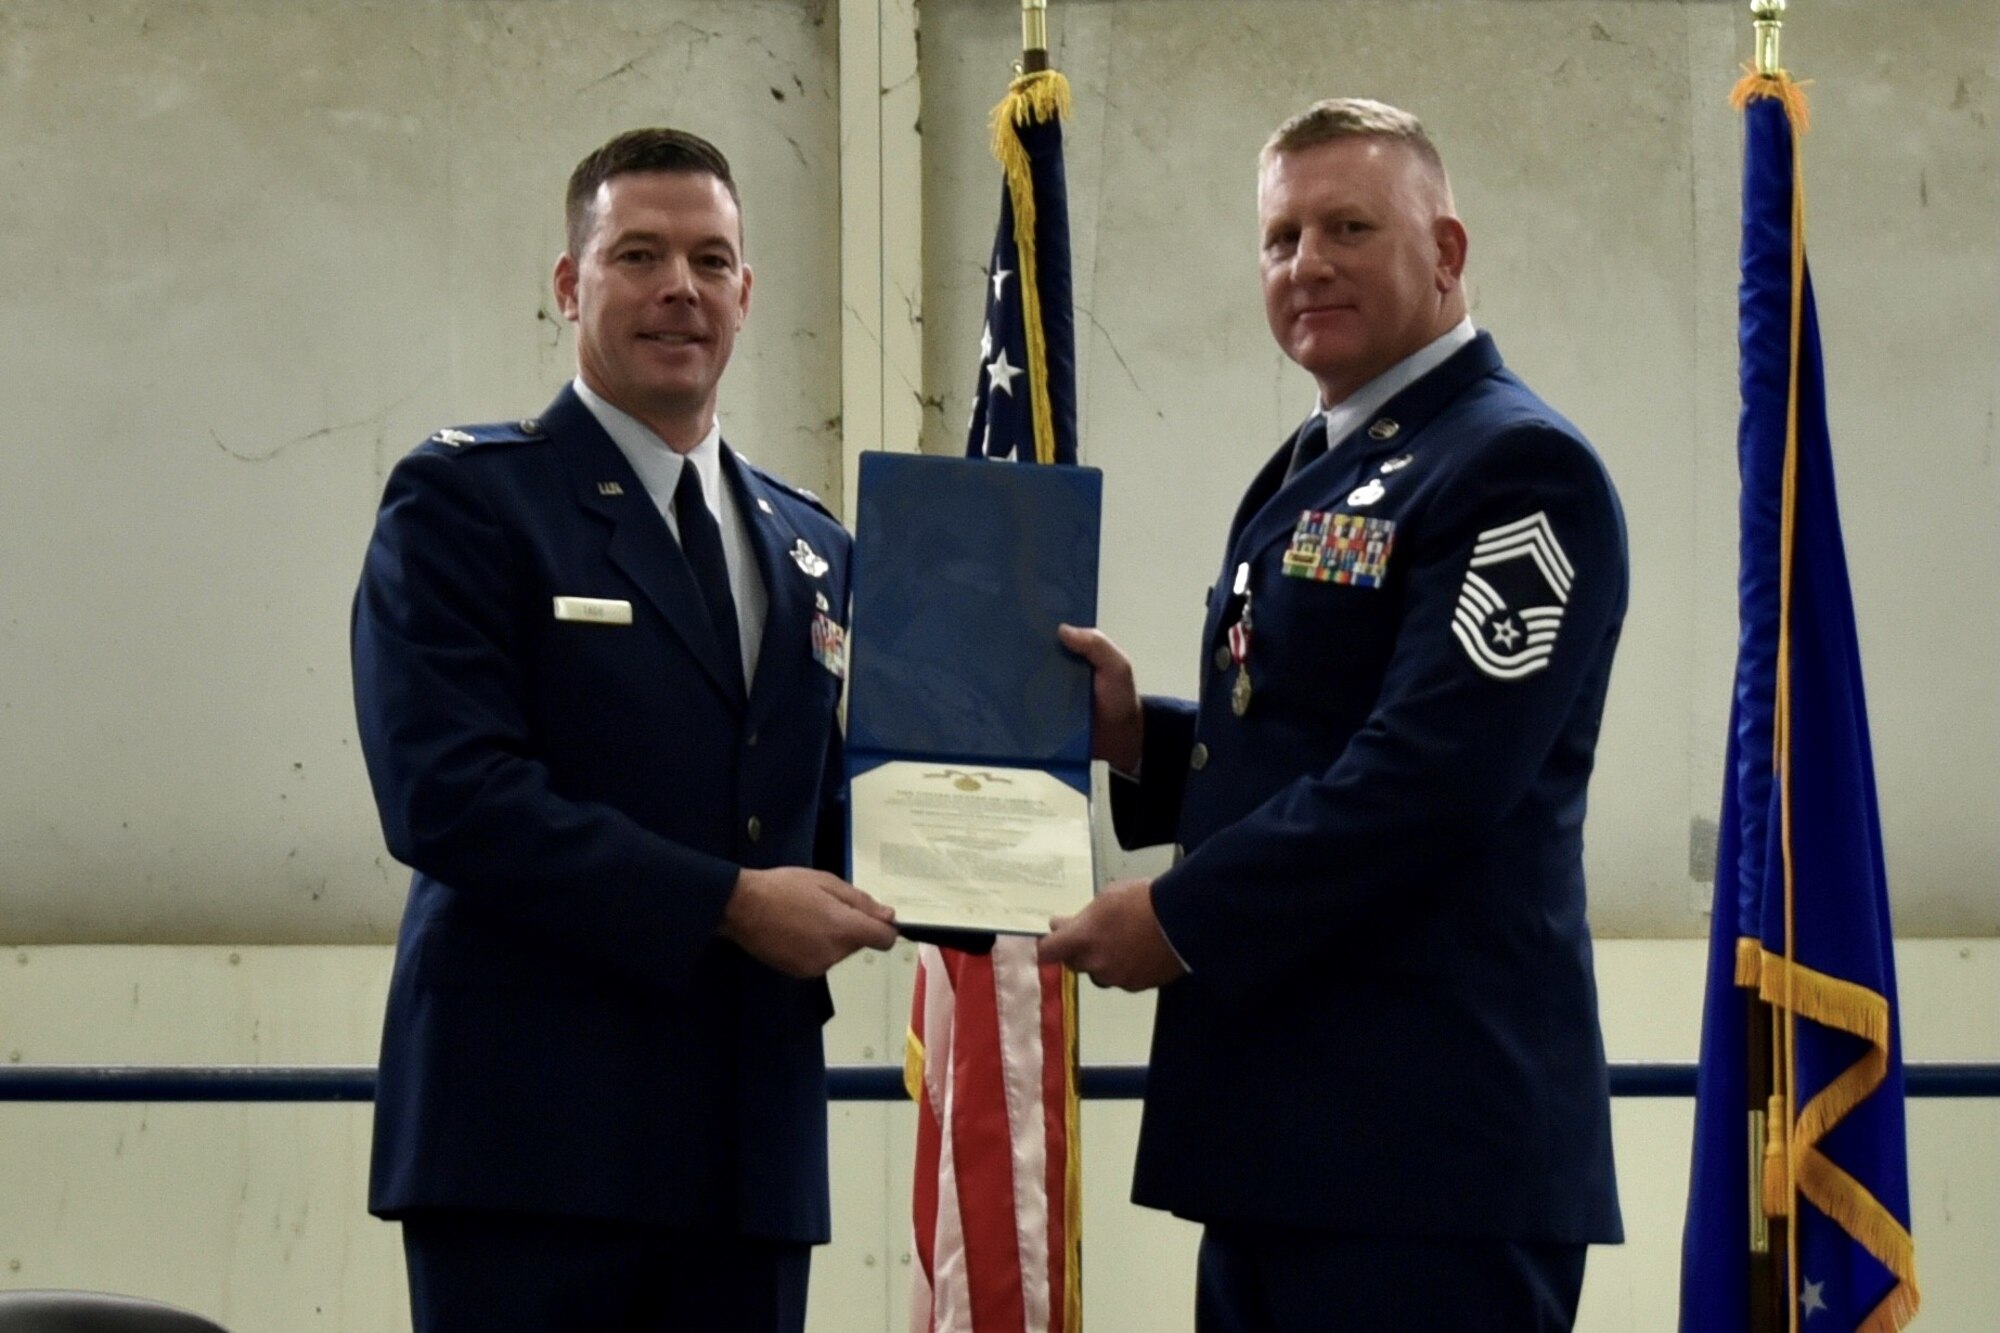 (right) Chief Master Sgt. Tommy Chasteen, 73d Aerial Port Squadron chief enlisted manager, completed his military 32 years of service at his retirement ceremony at U.S. Naval Air Station Joint Reserve Base Fort Worth, Texas  on February 6, 2021. Col. Gavin Tade, 10th Air Force Standardization and Evaluation Division chief, presided over the ceremony. (U.S. Air Force photo by Staff Sgt. Randall Moose)